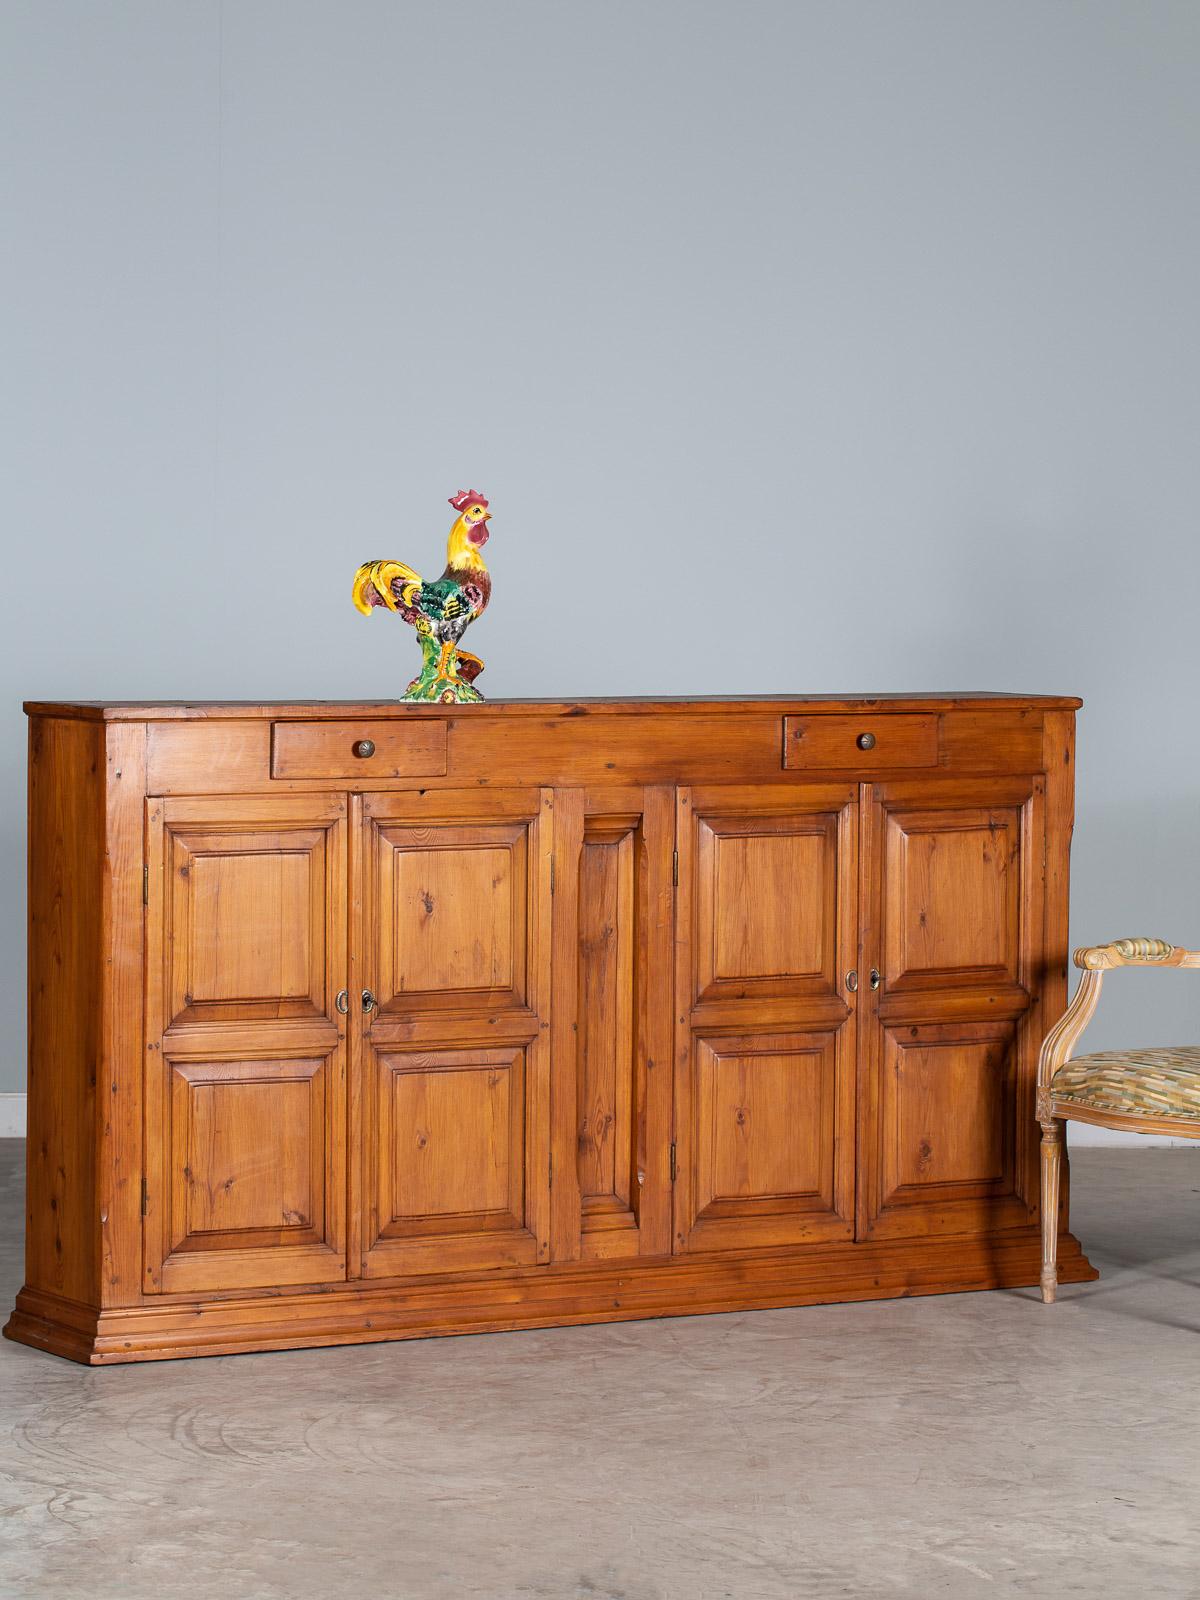 This tall vintage French solid pine buffet credenza cabinet circa 1930 features four cabinet doors made of deeply recessed panels and molding and two drawers just below the top and centered over the cabinet doors. Heavy and substantial this piece